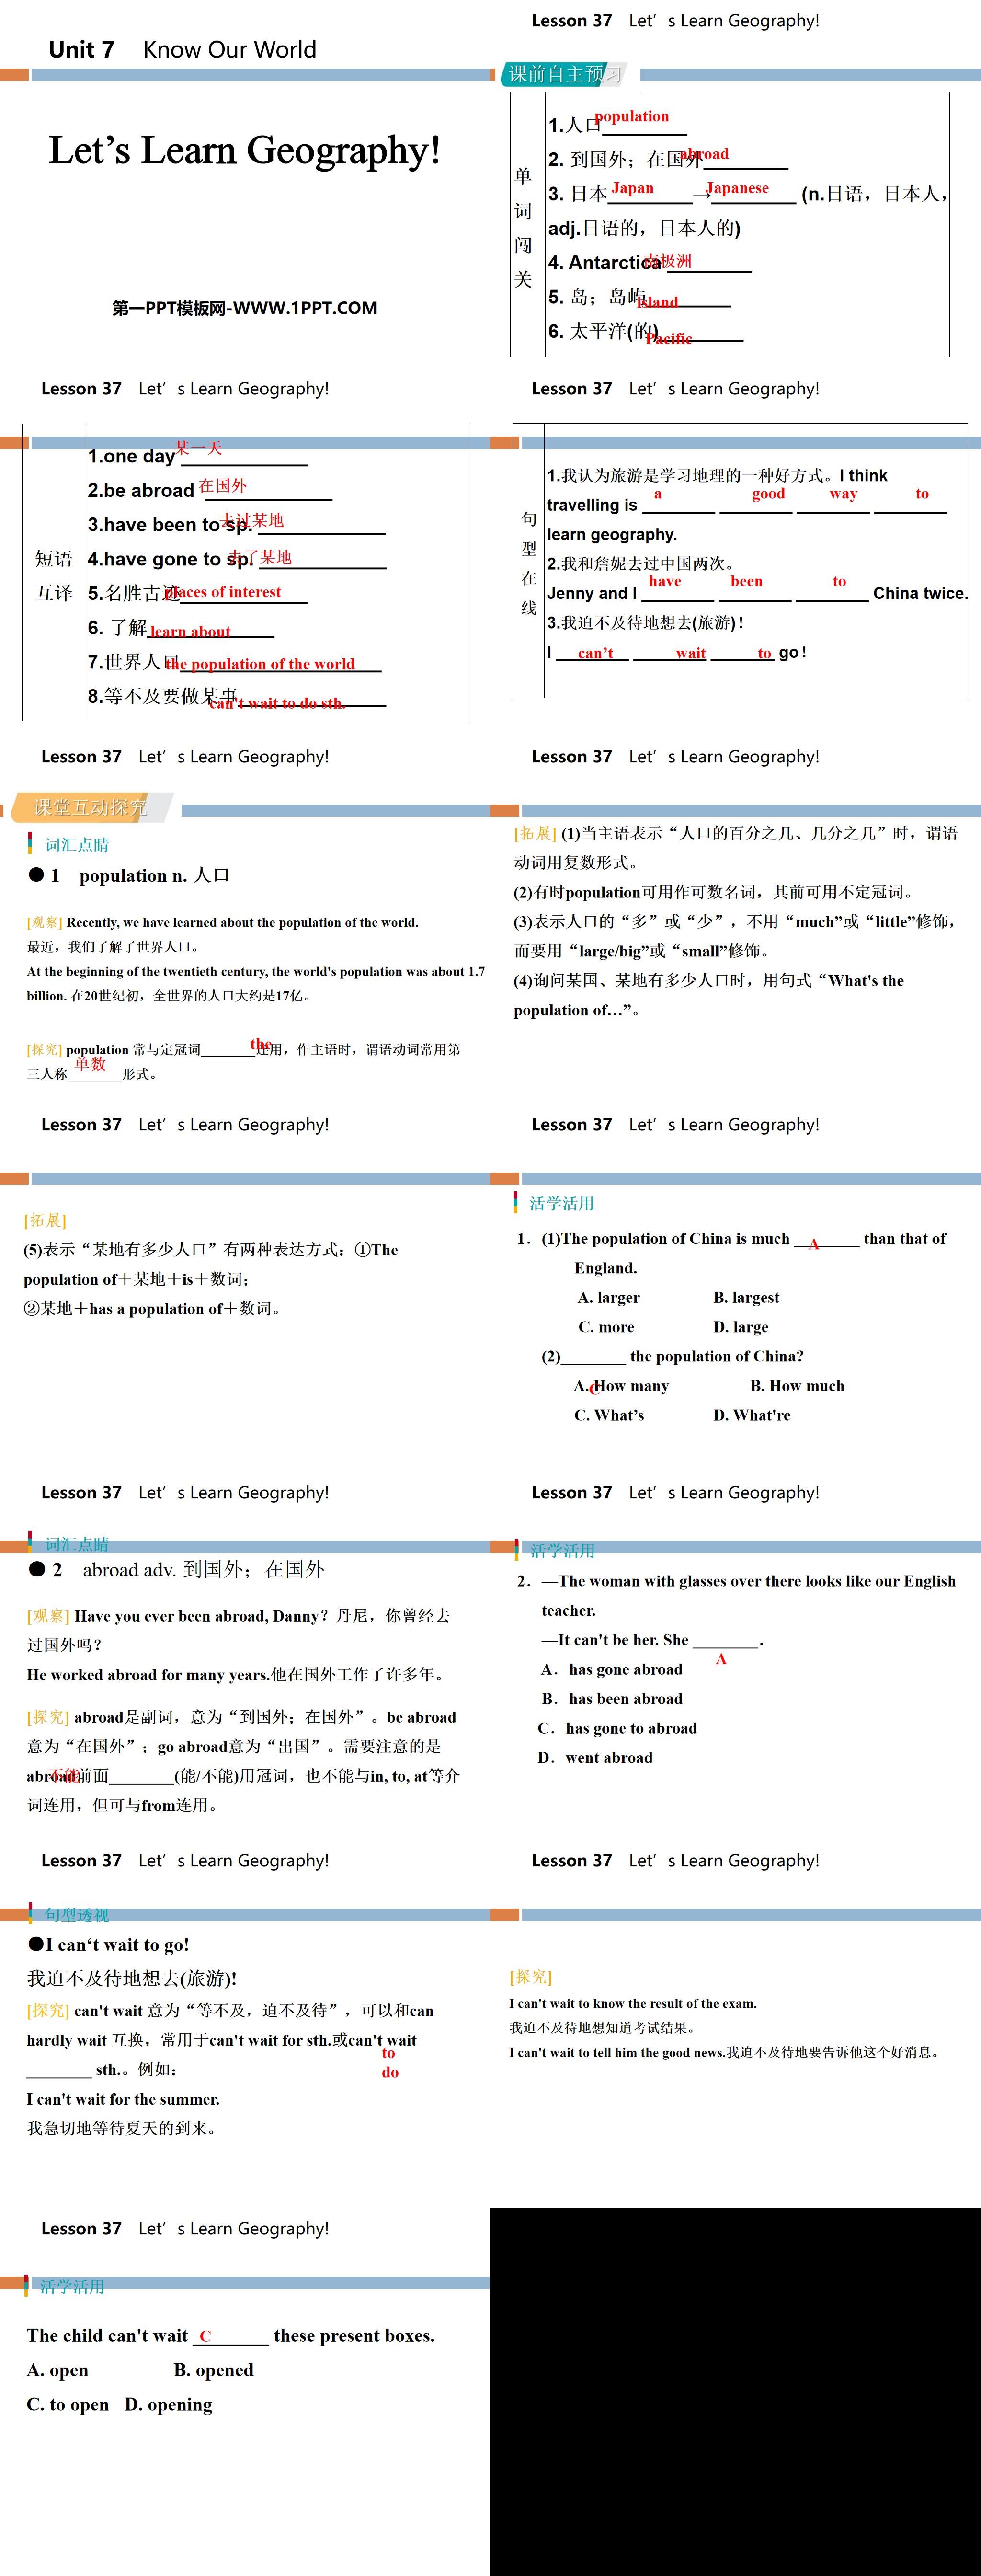 《Let's Learn Geography》Know Our World PPT教学课件
（2）